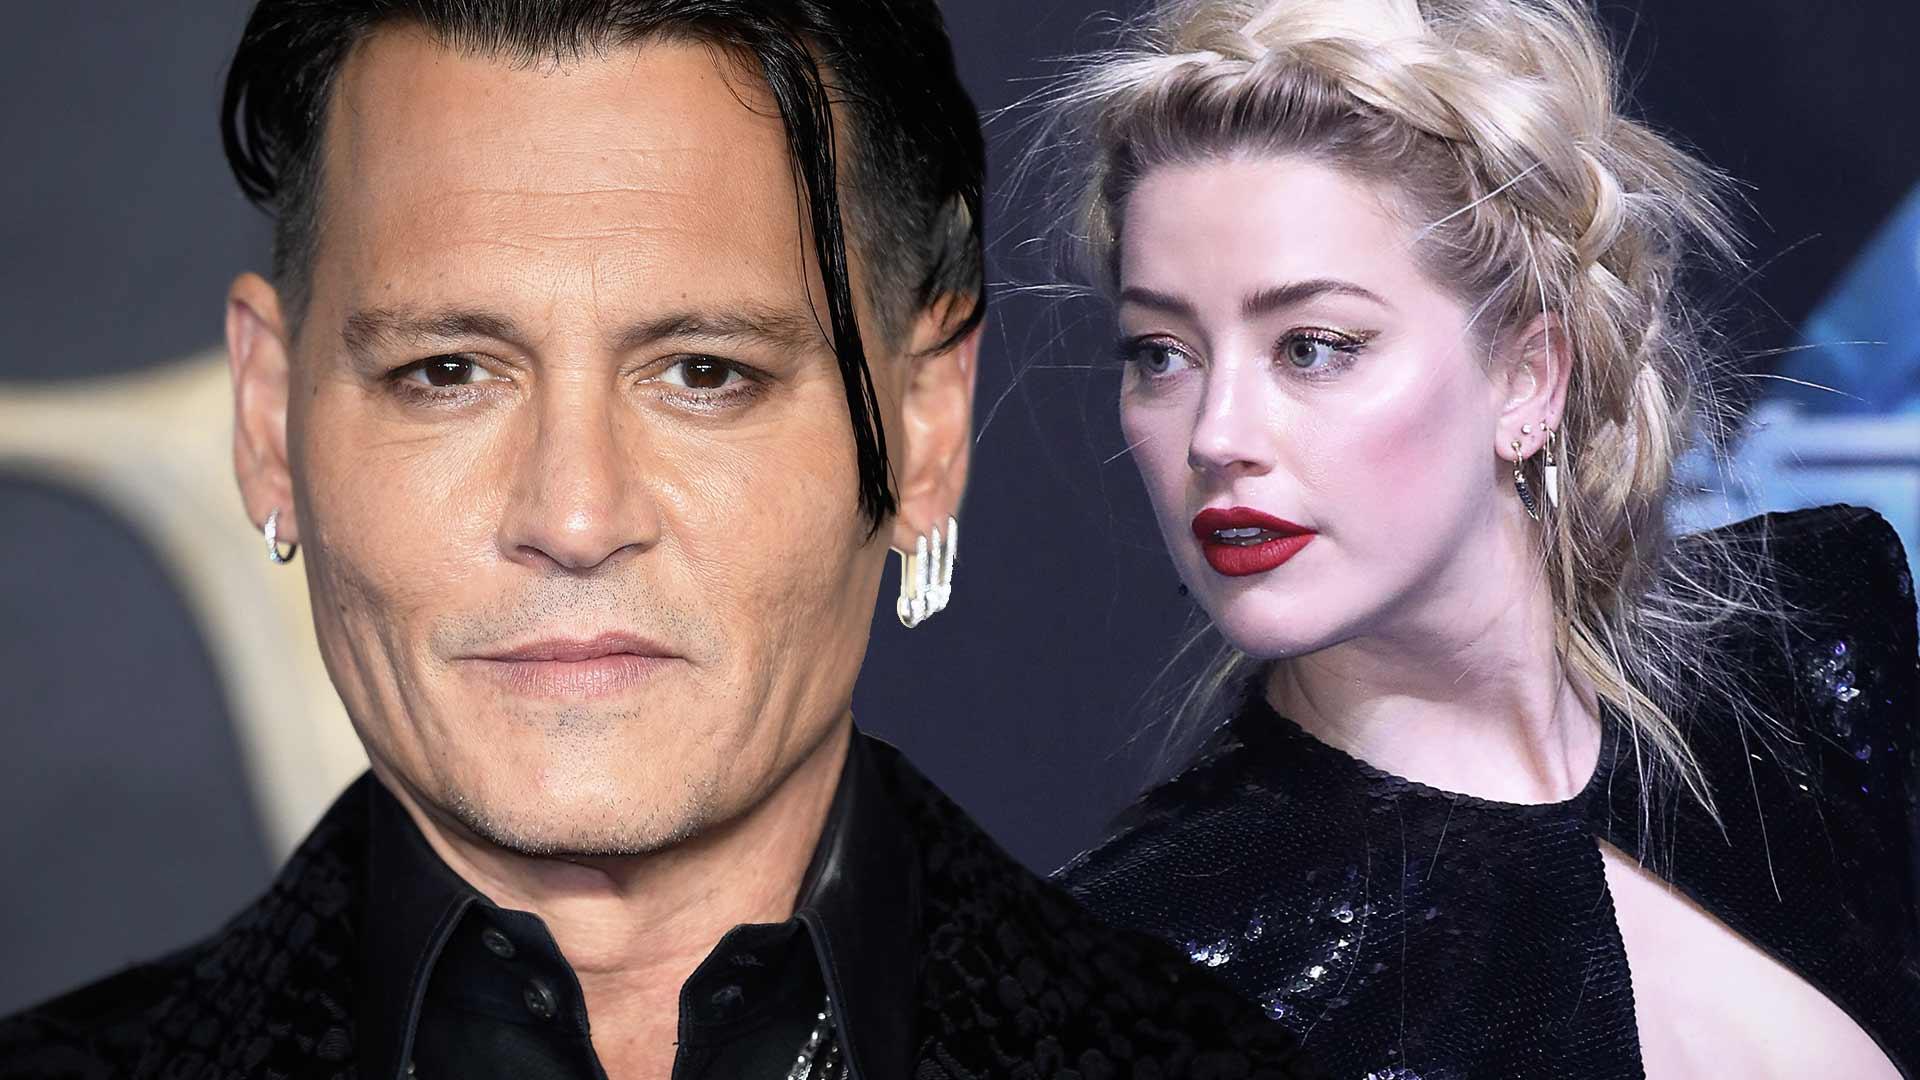 Amber Heard’s Longtime Stylist’s Testimony Disputes Claims of Facial Injuries Caused by Johnny Depp